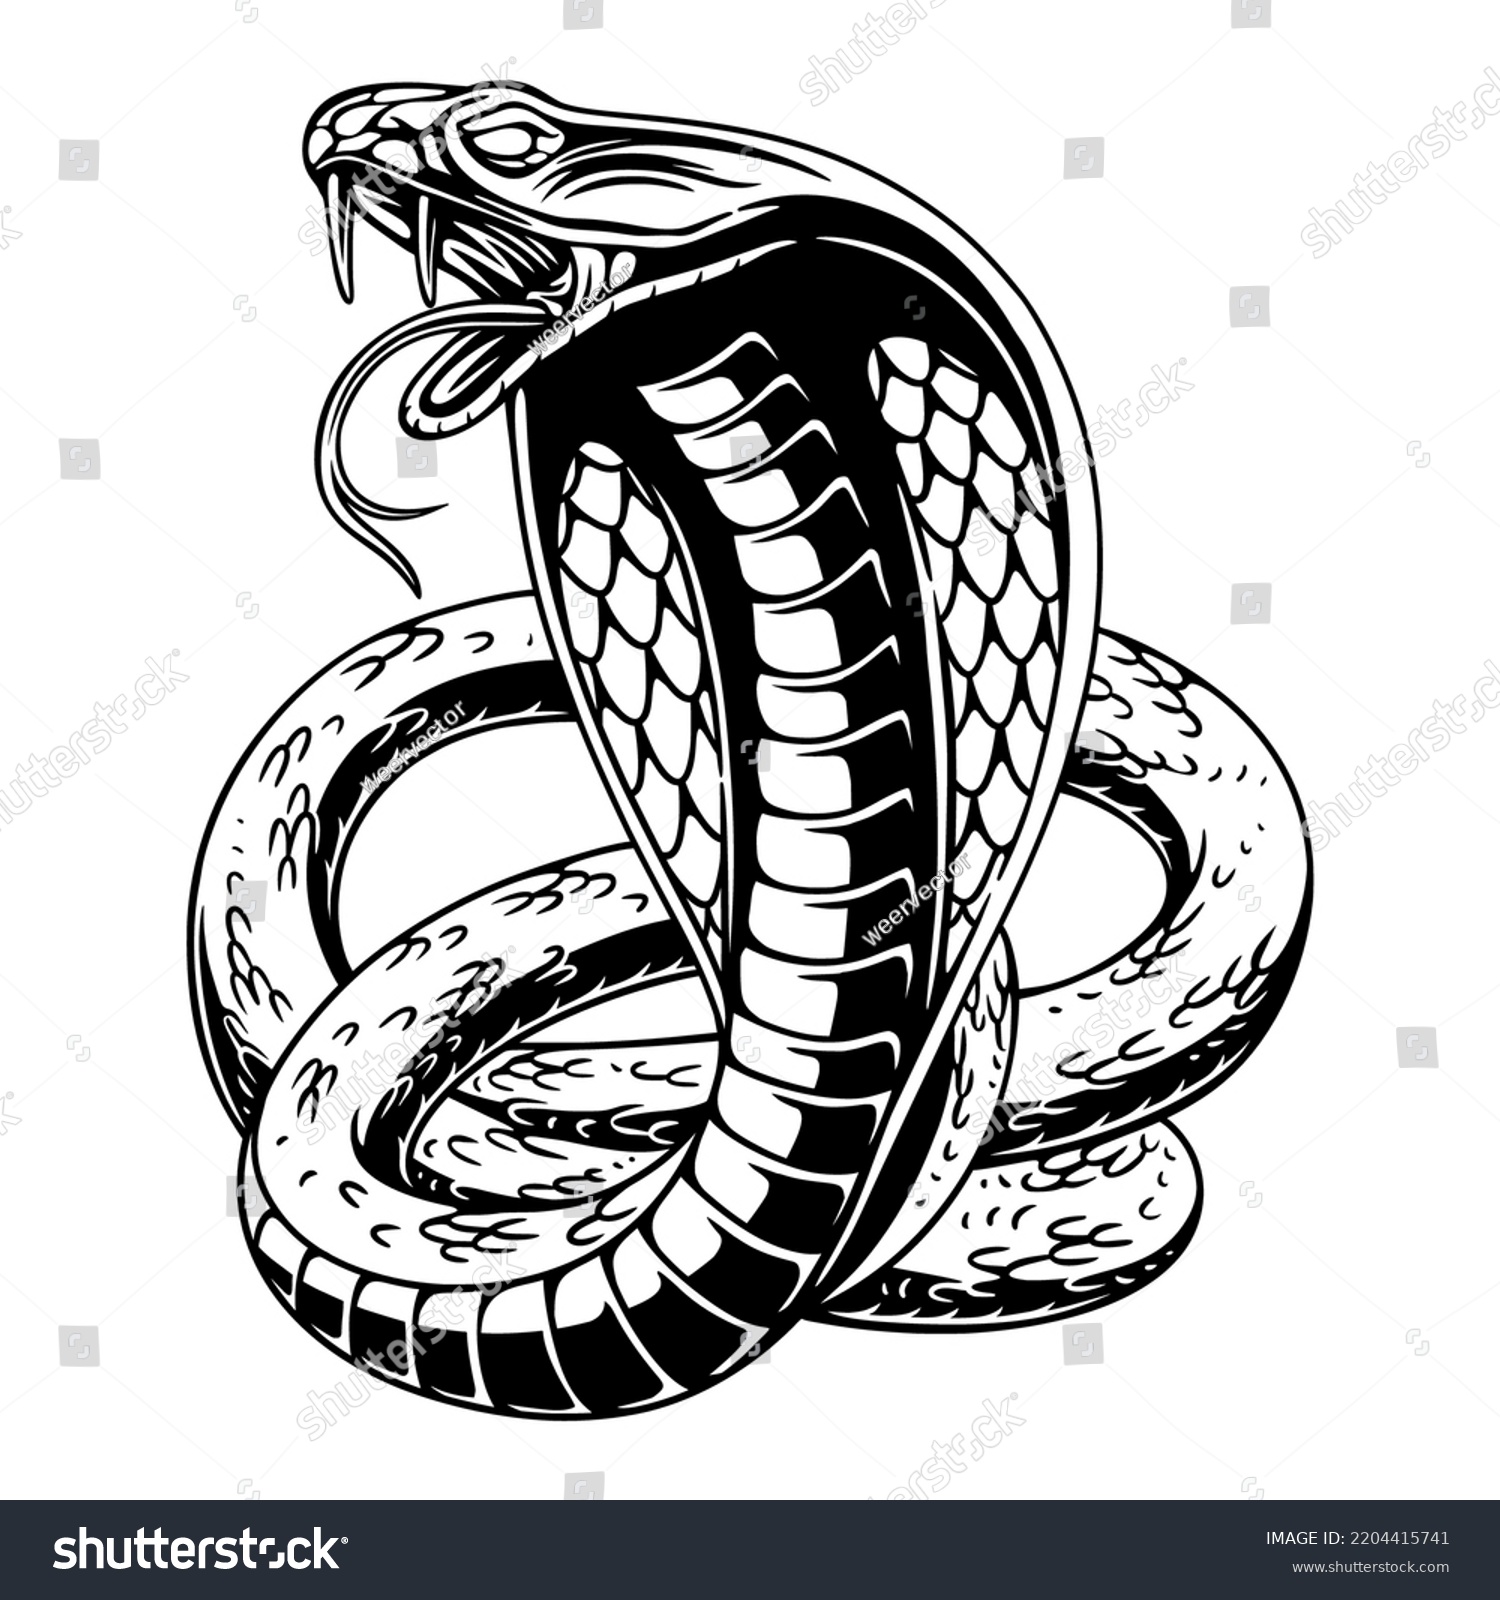 SVG of vector design angry cobra with circle background black and white illustration svg